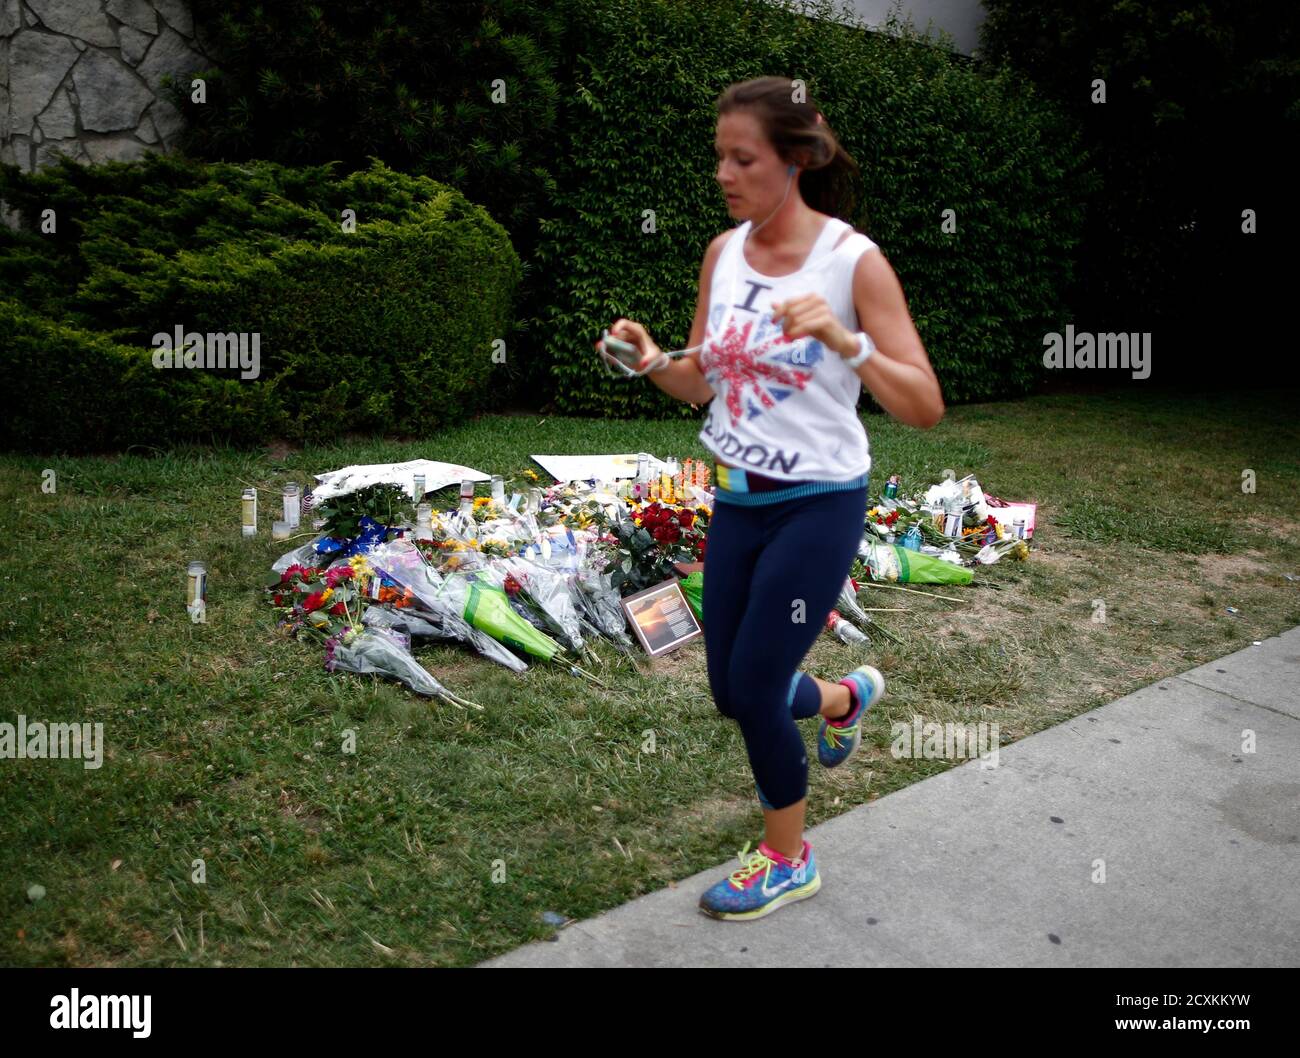 A woman jogs past a makeshift memorial in front of the Alpha Phi sorority house where two women were killed in the Isla Vista neighborhood of Santa Barbara, California May 26, 2014. Twenty-two year old Elliot Rodger killed six people before taking his own life in a rampage through a California college town shortly after he posted a threatening video railing against women, police said on Saturday.  REUTERS/Lucy Nicholson   (UNITED STATES - Tags: CRIME LAW) Banque D'Images